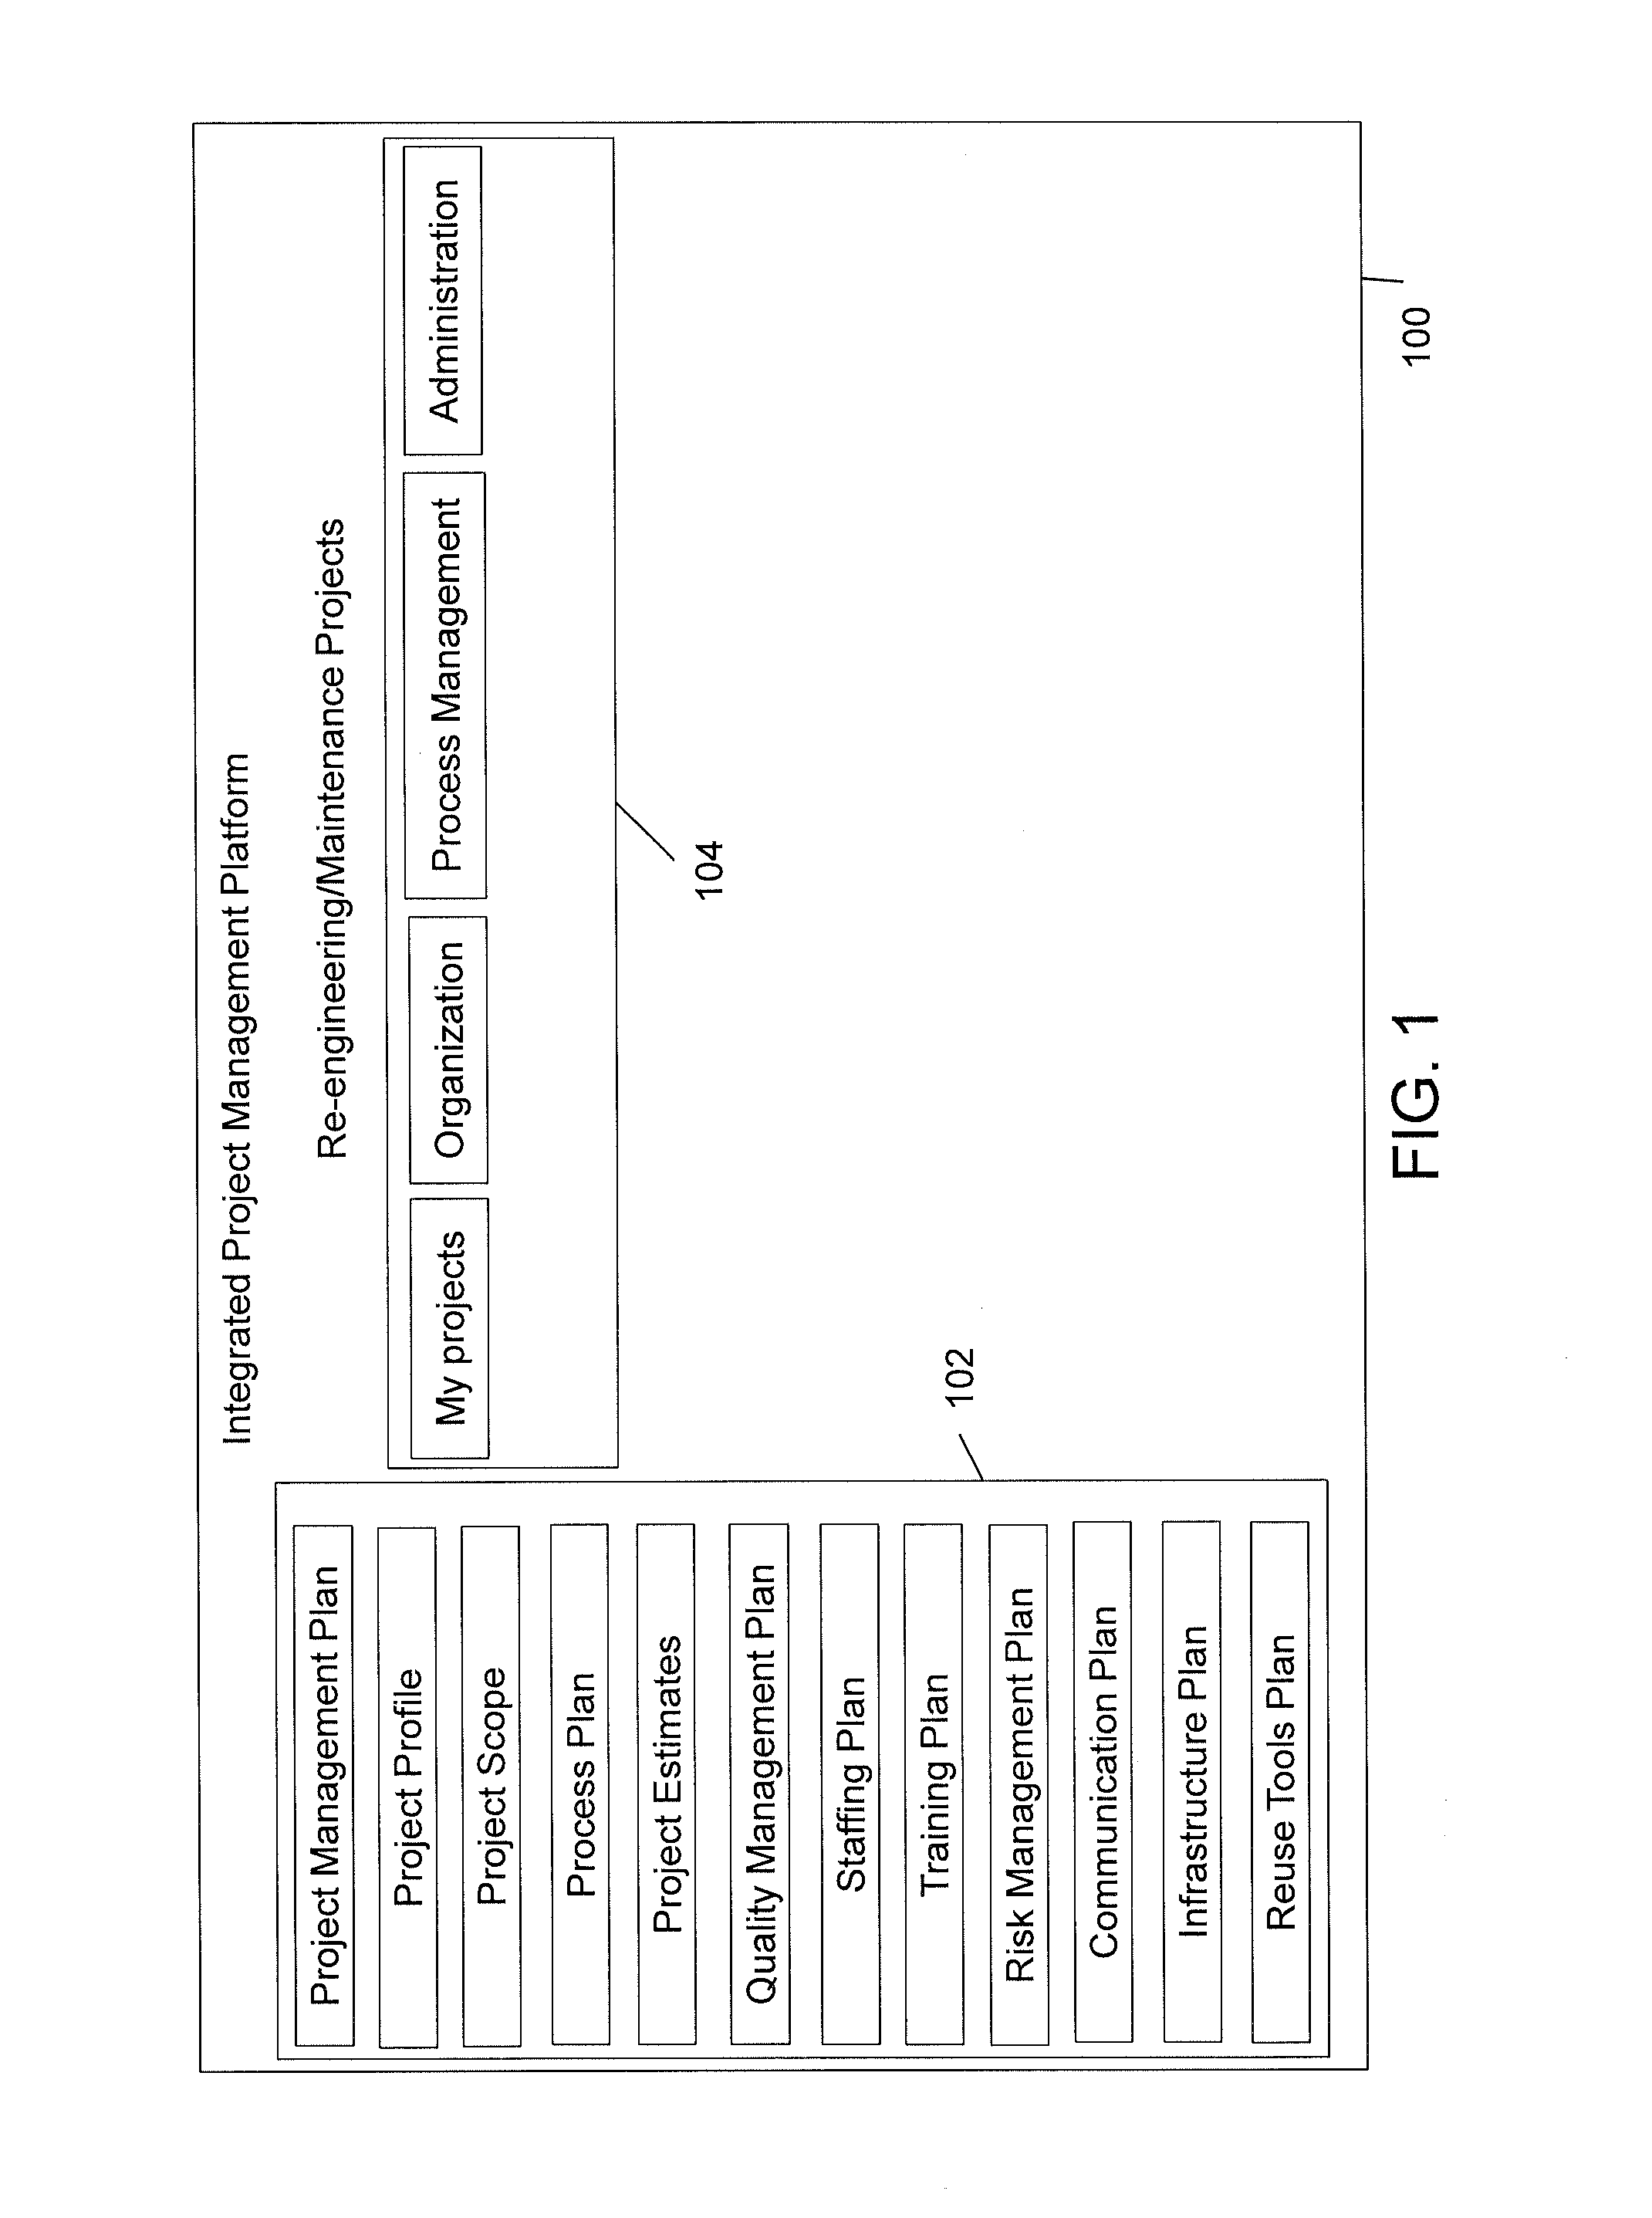 Method and system for determining performance parameters of software project based on software-engineering tools usage